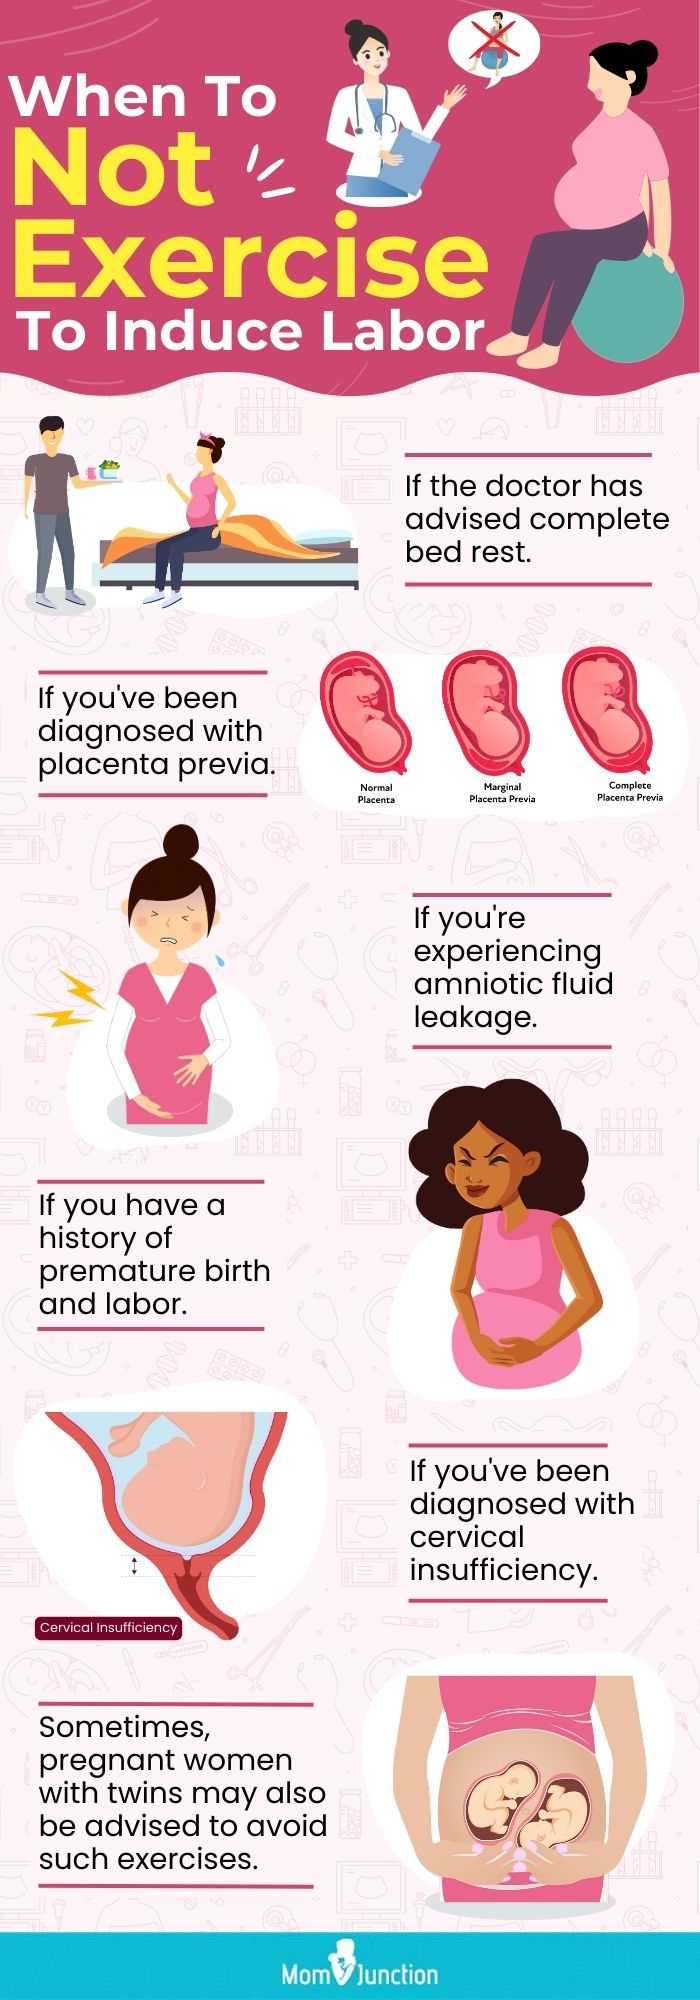 when to not exercise to induce labor (infographic)